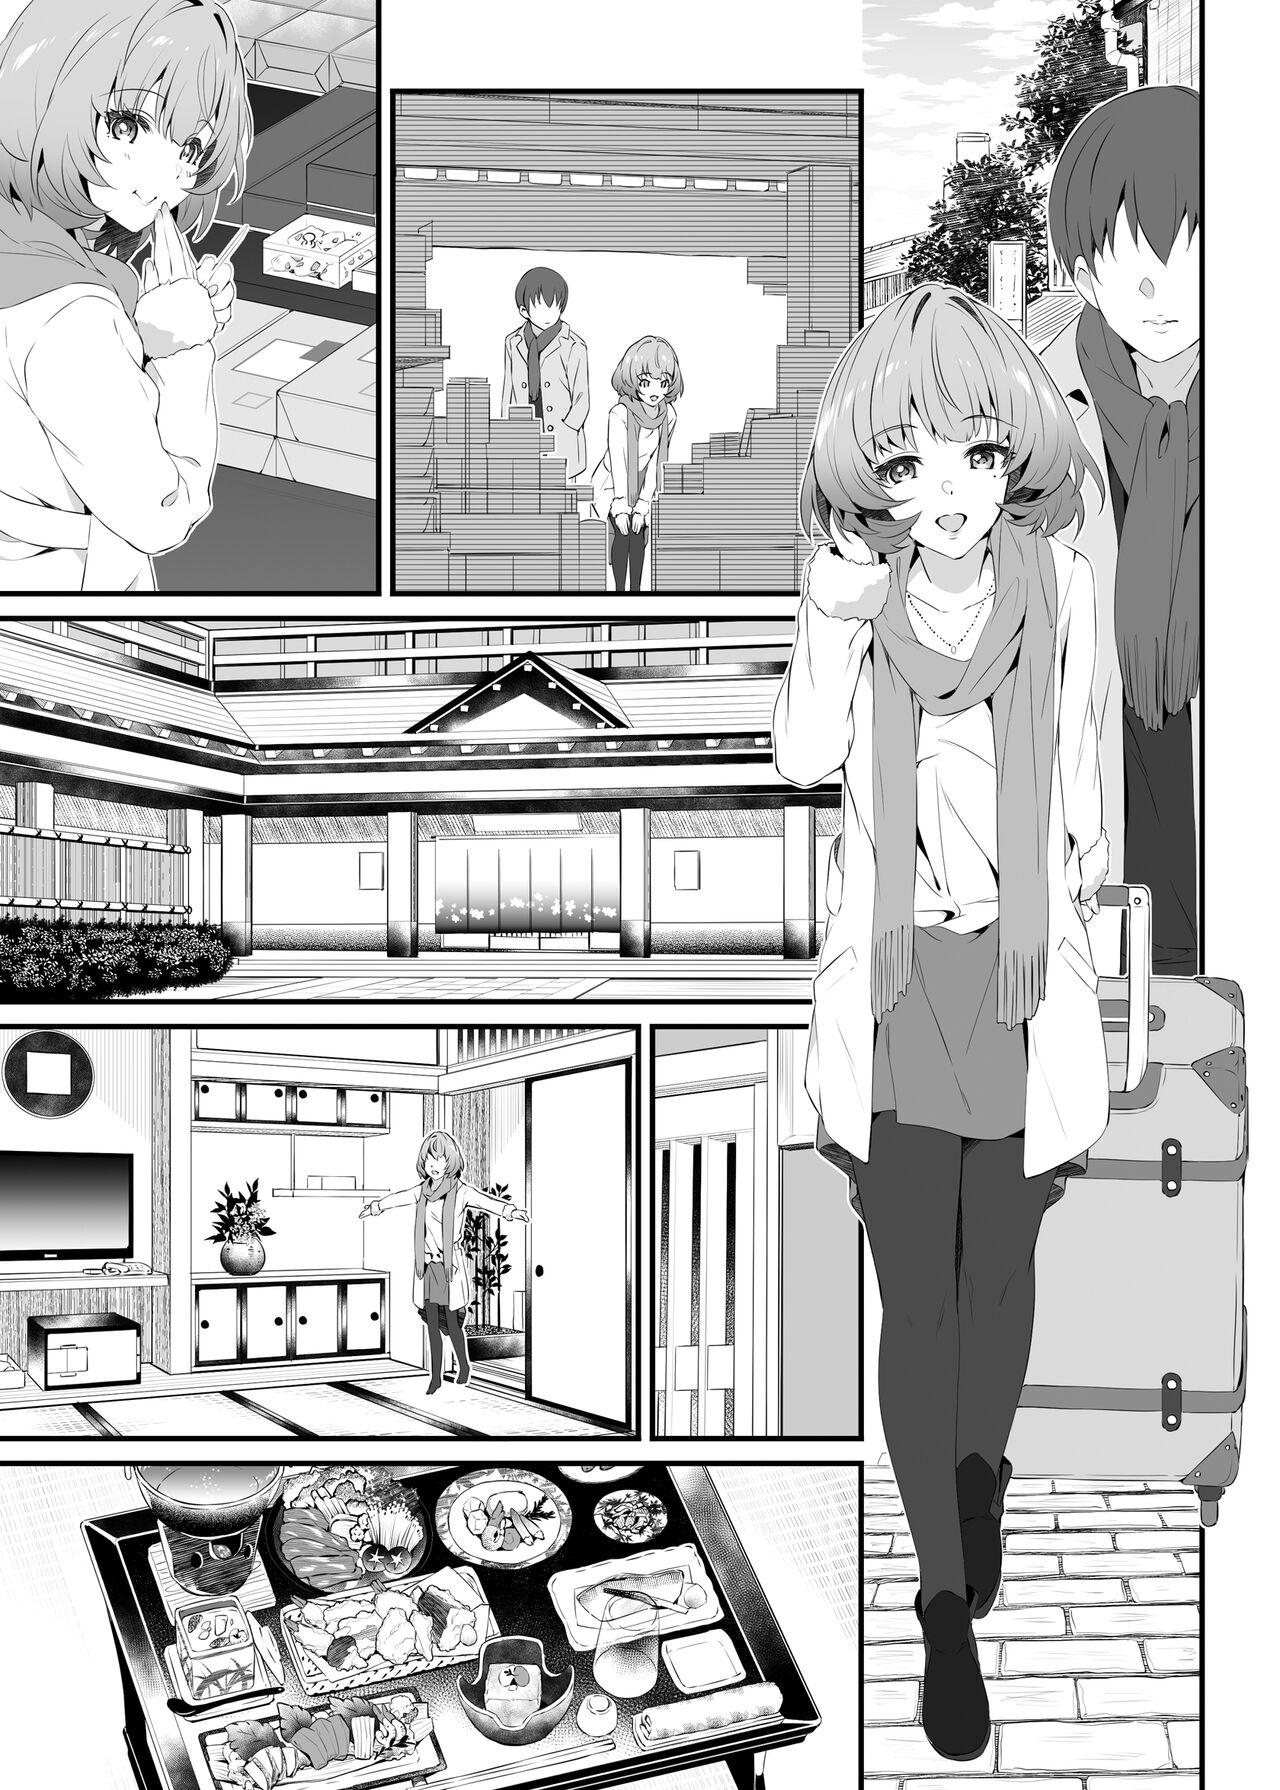 Panty Flowers blooming at night and the kings in the dream. - The idolmaster White Girl - Page 7